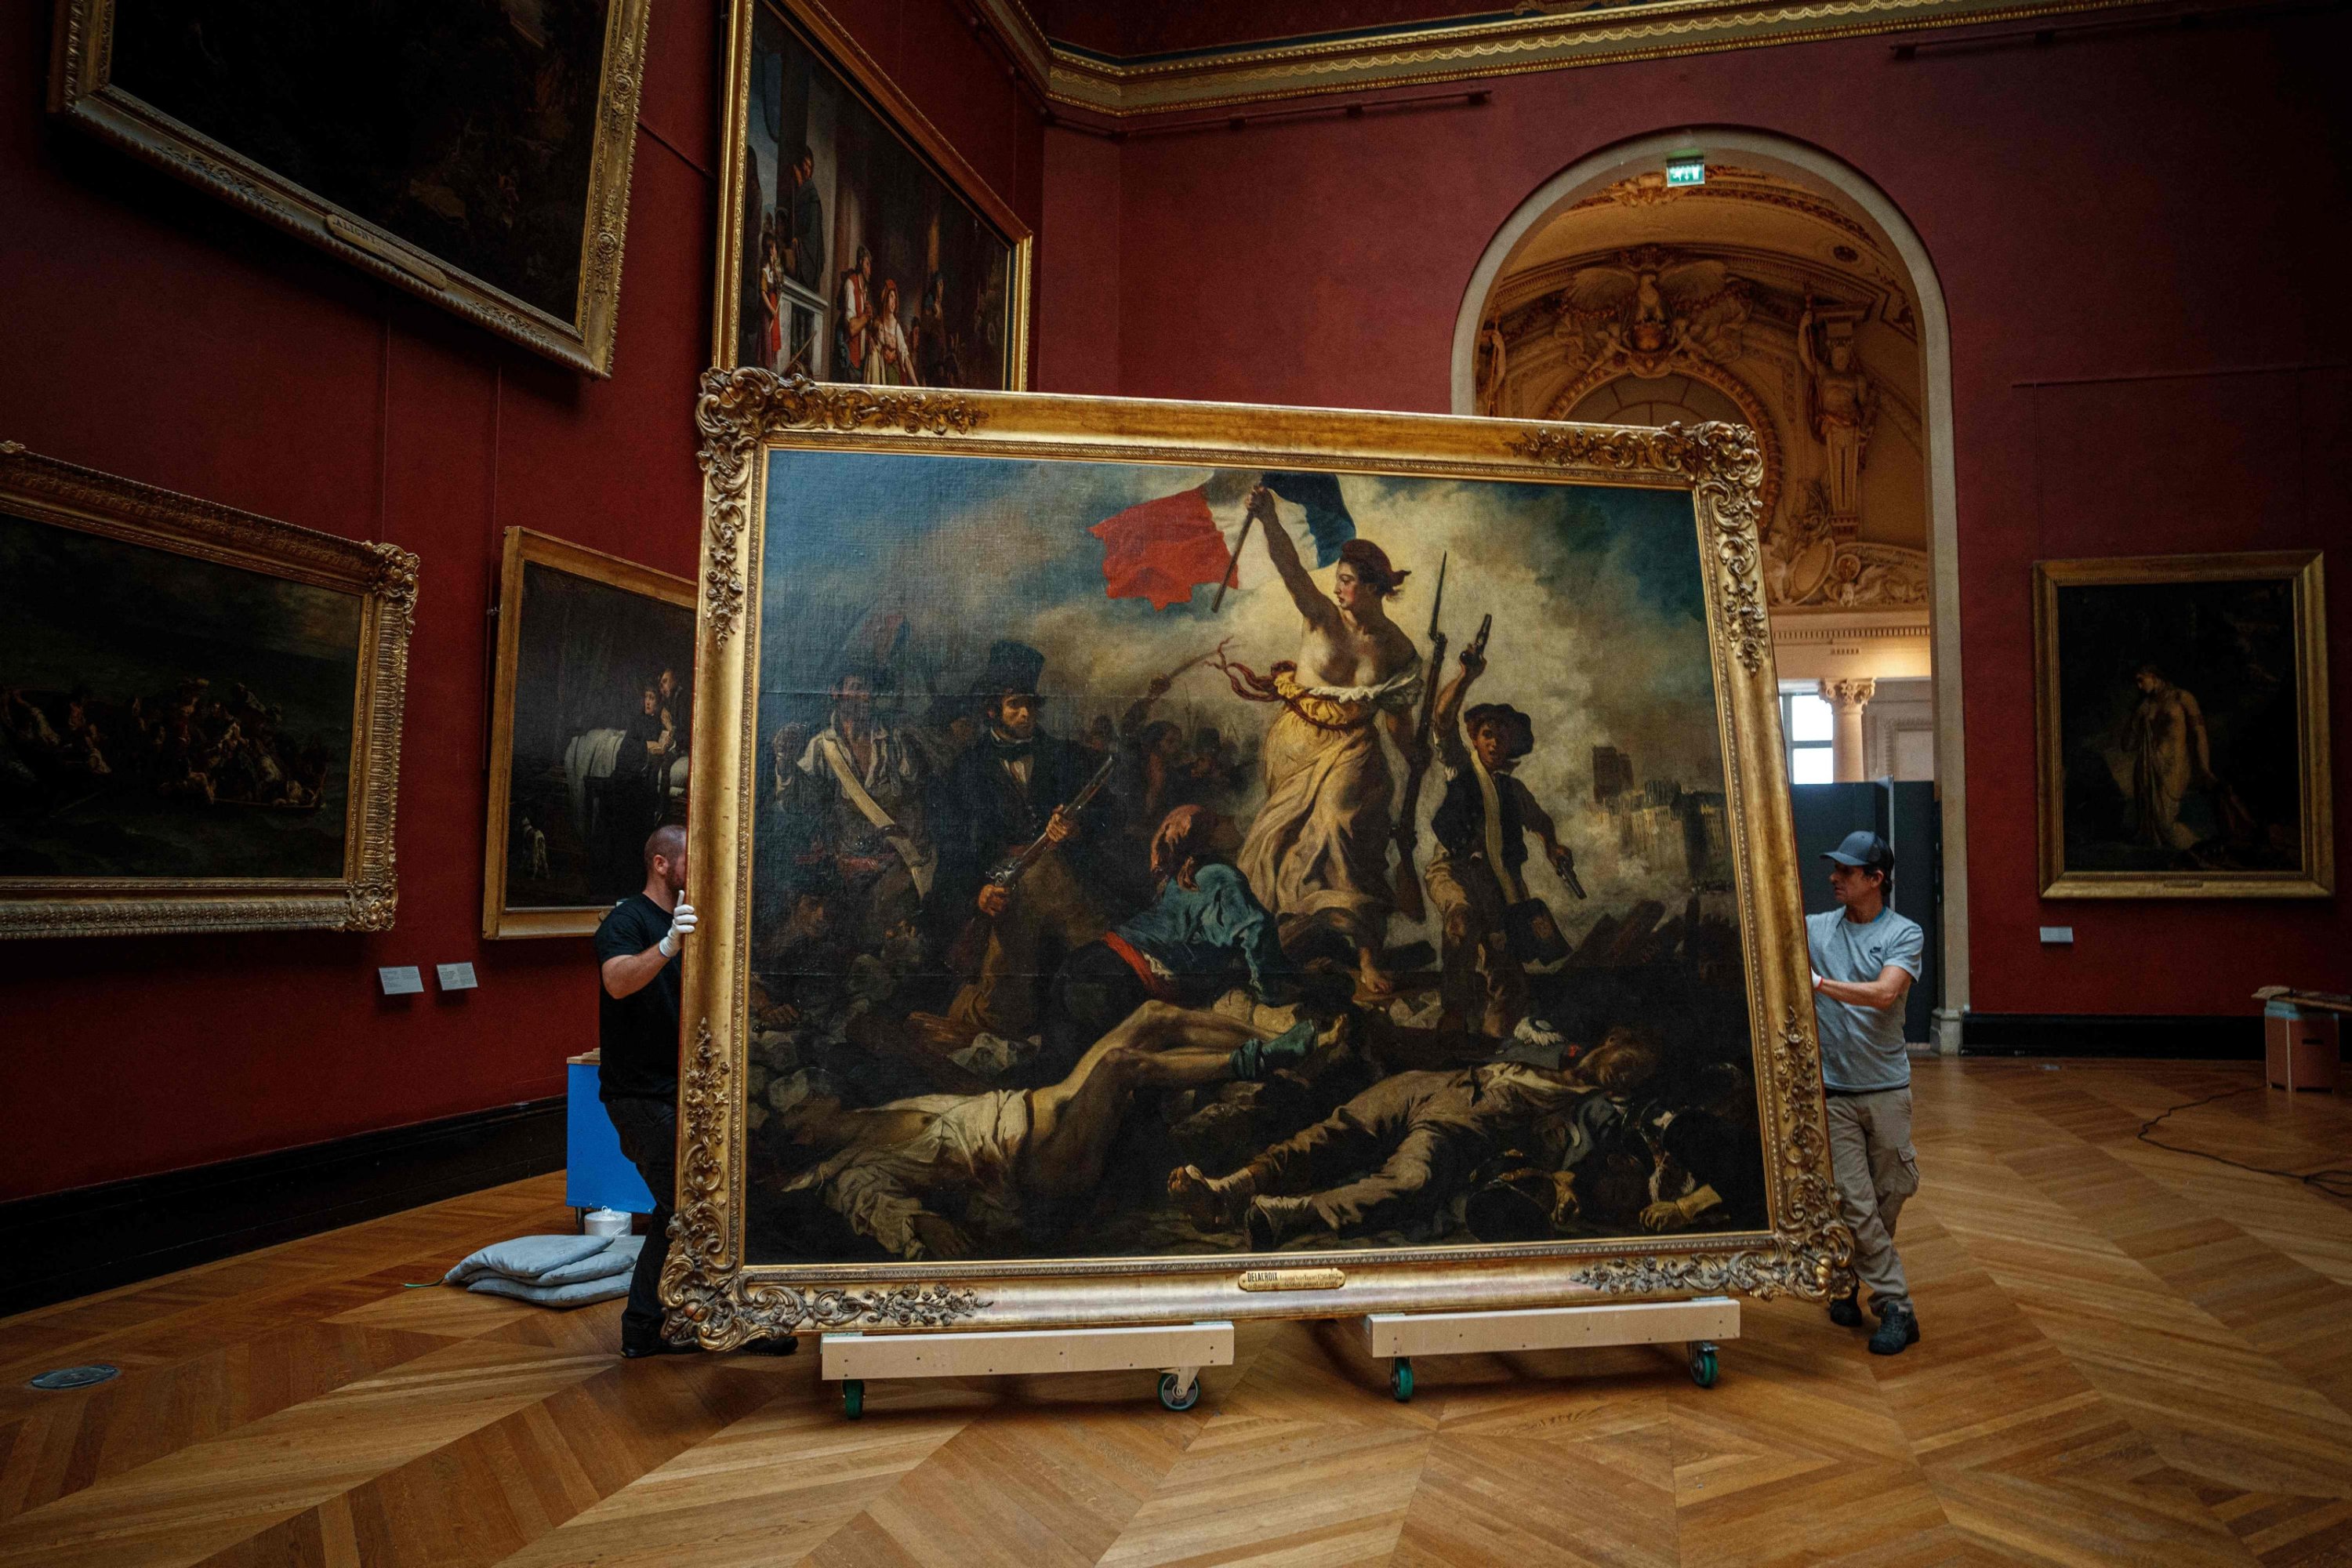 Gallery workers remove the painting 